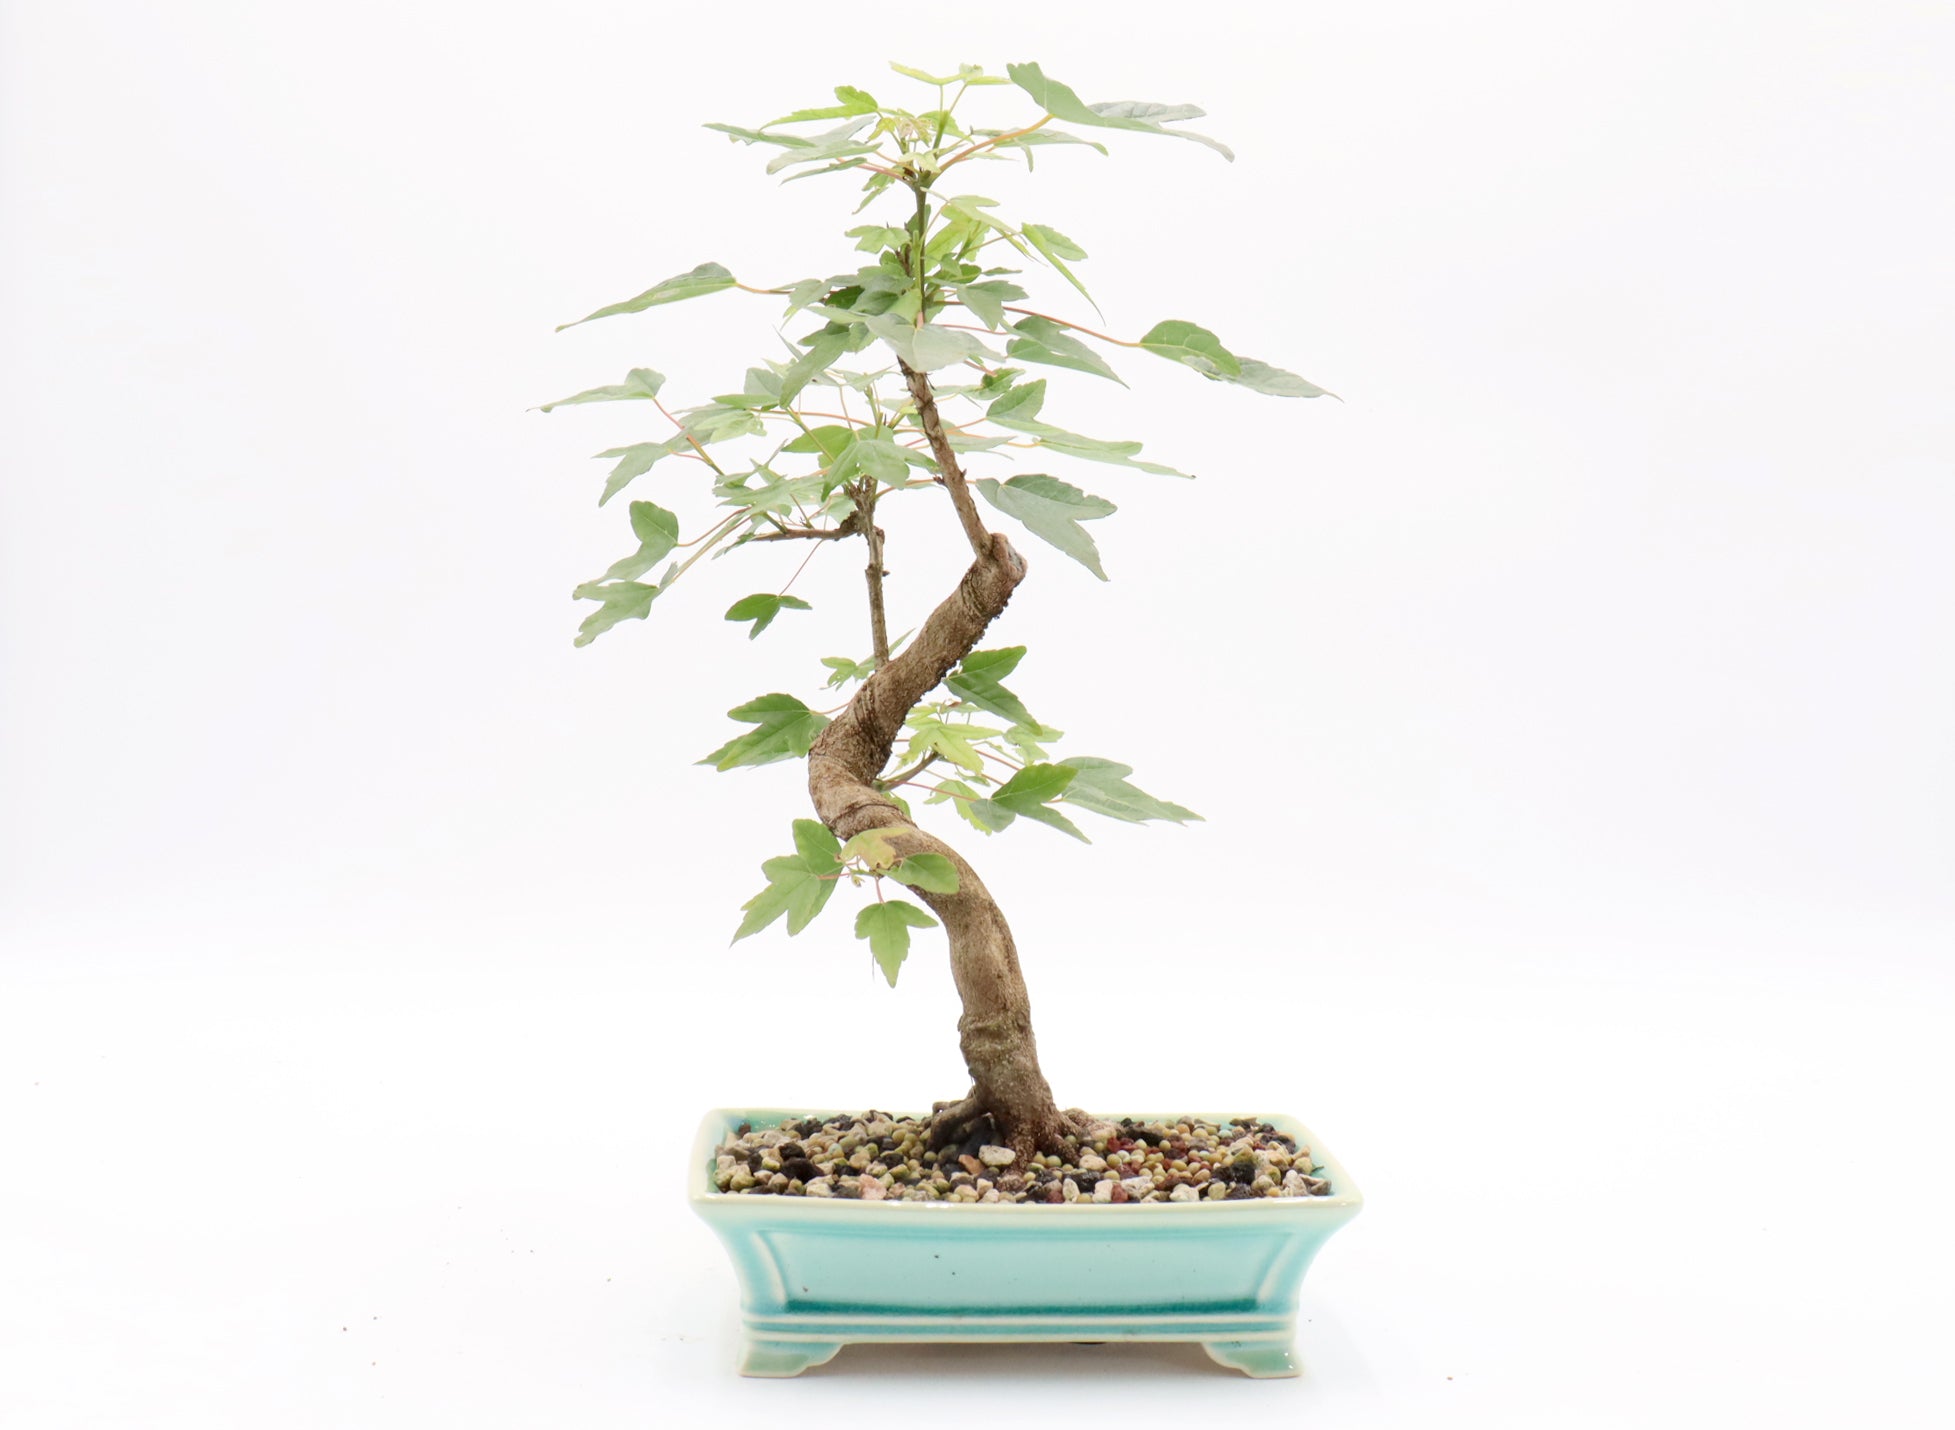 Trident Maple Bonsai in a Yixing Container